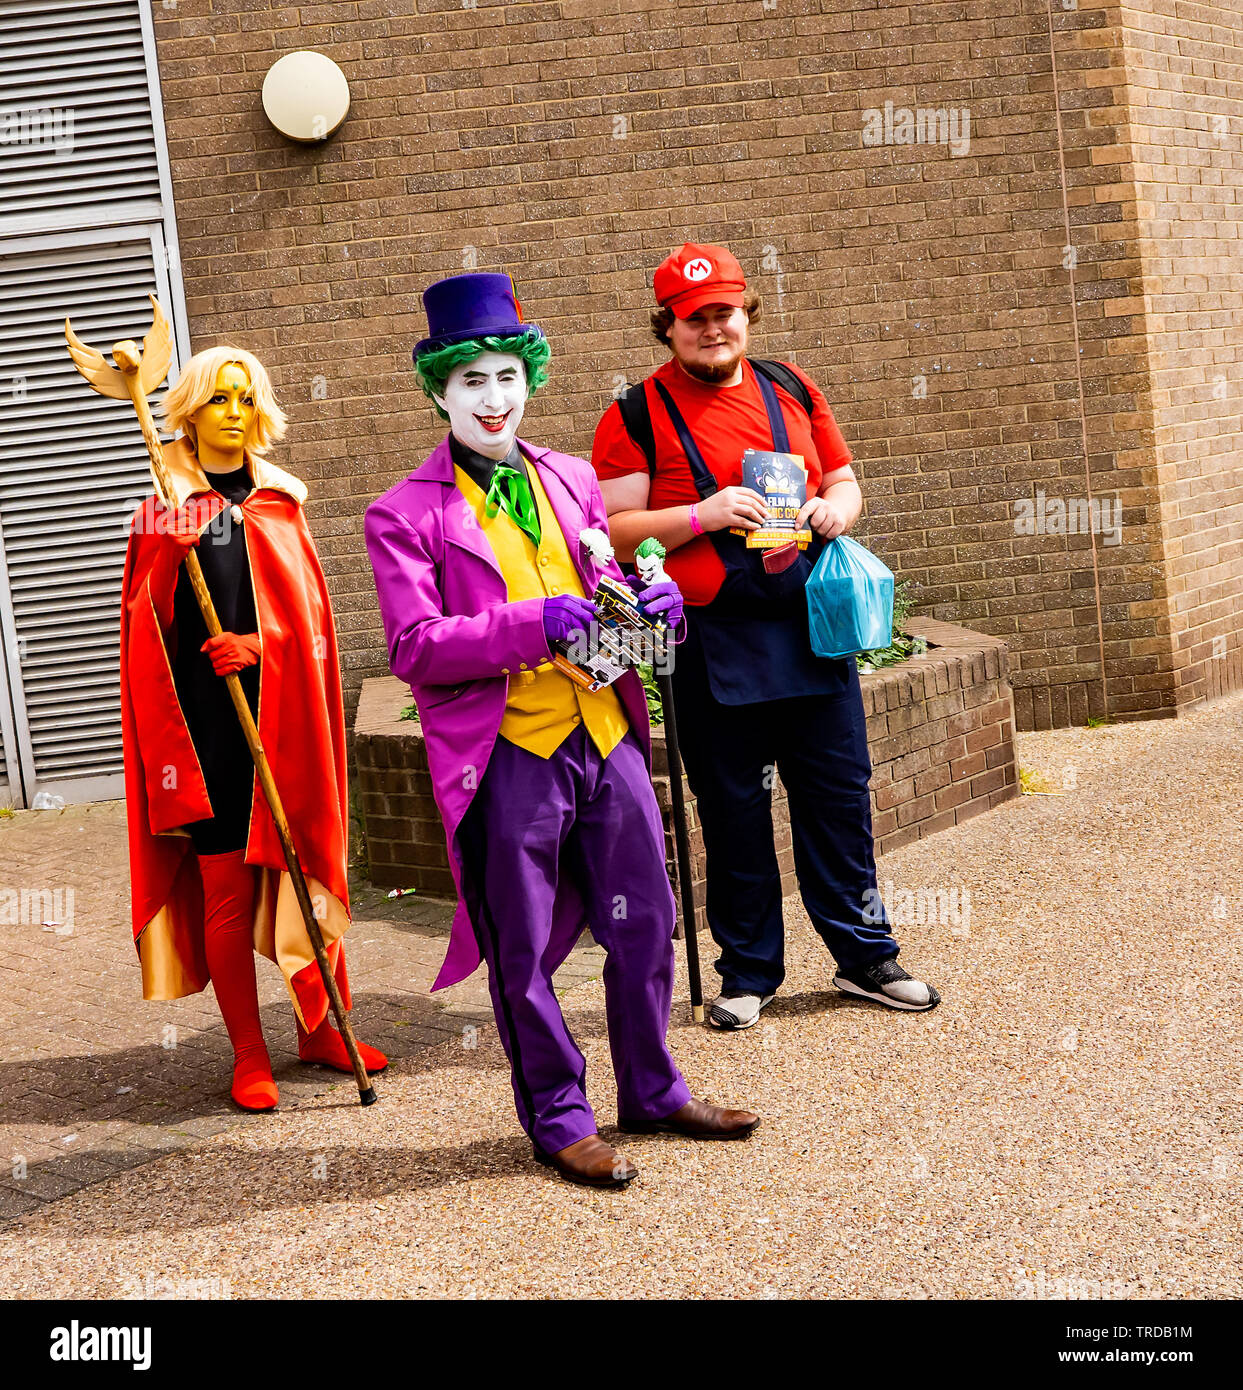 Great Yarmouth Comicon 2019 – The Joker, Mario and a super heroine outside the entrance of the Comicon event in the seaside town of Great Yarmouth Stock Photo